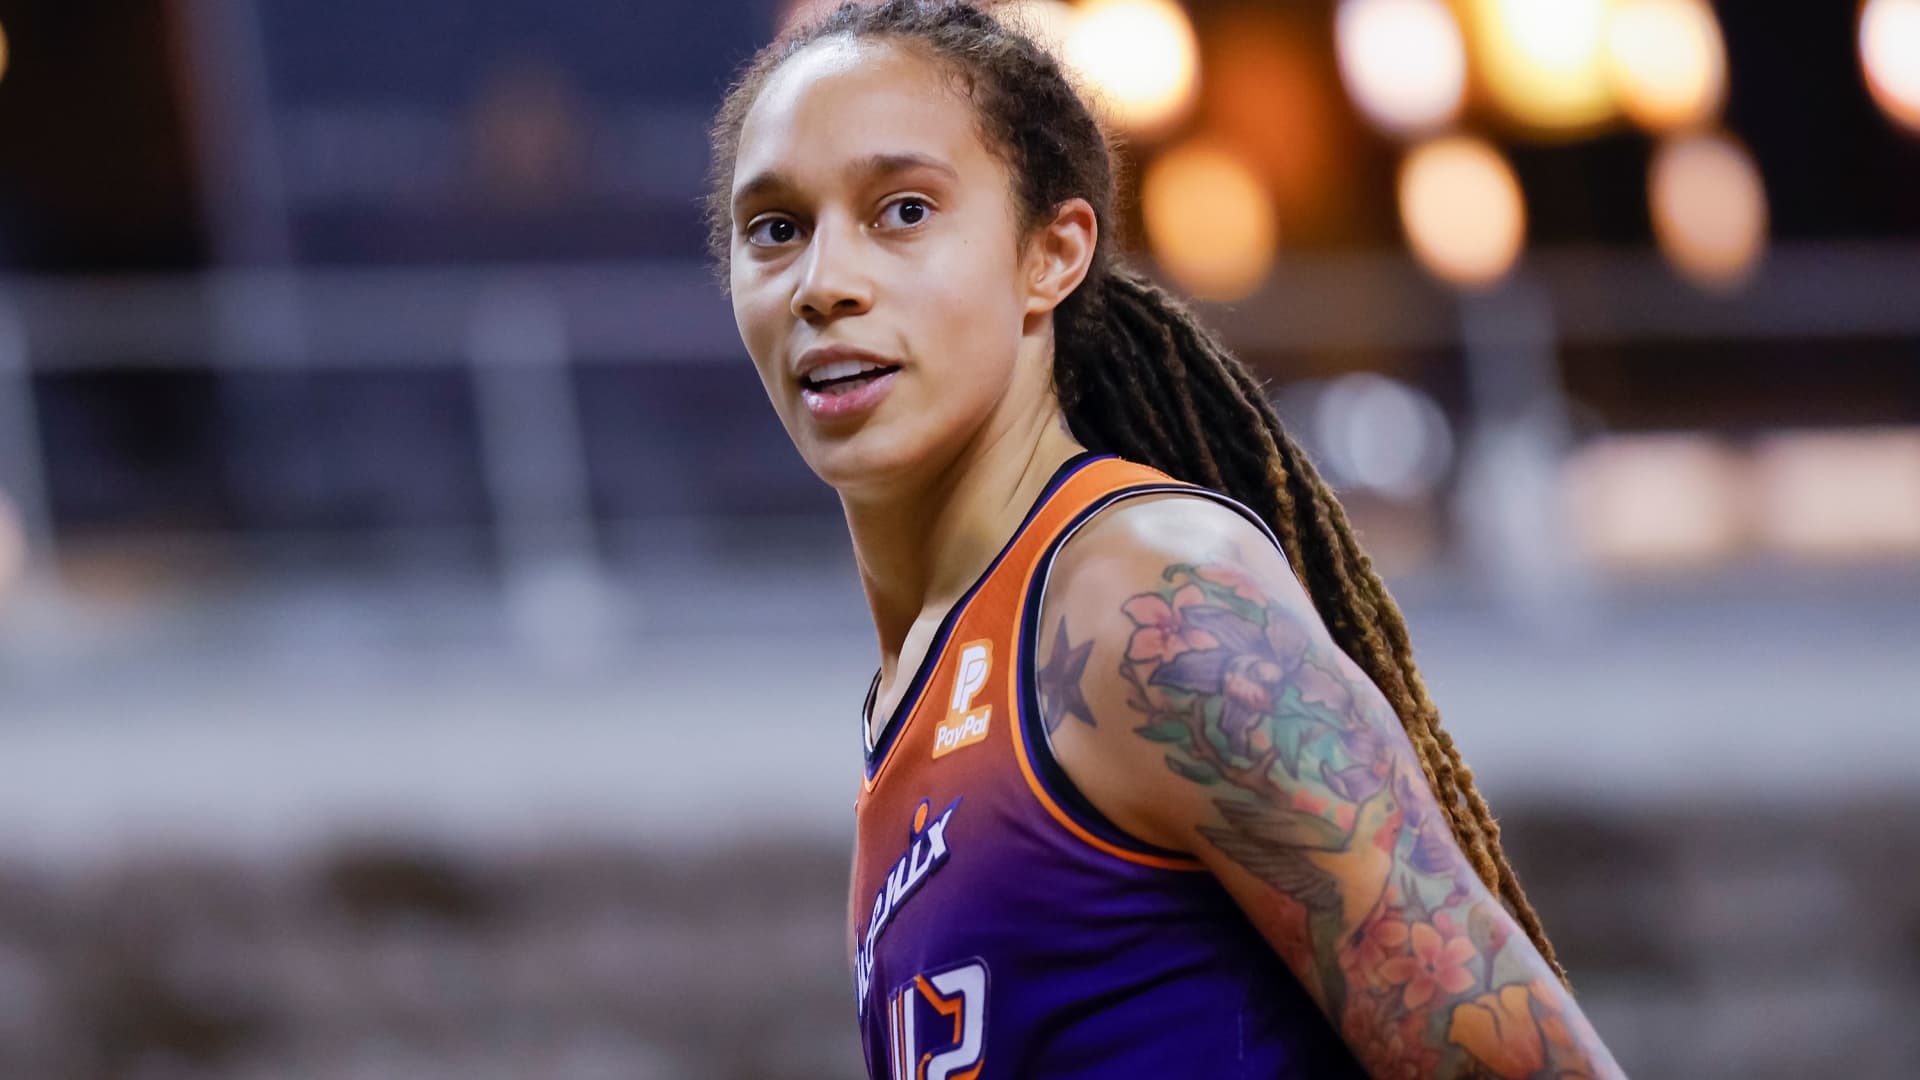 Brittney Griner #42 of the Phoenix Mercury is seen during the game against the Indiana Fever at Indiana Farmers Coliseum on September 6, 2021 in Indianapolis, Indiana.